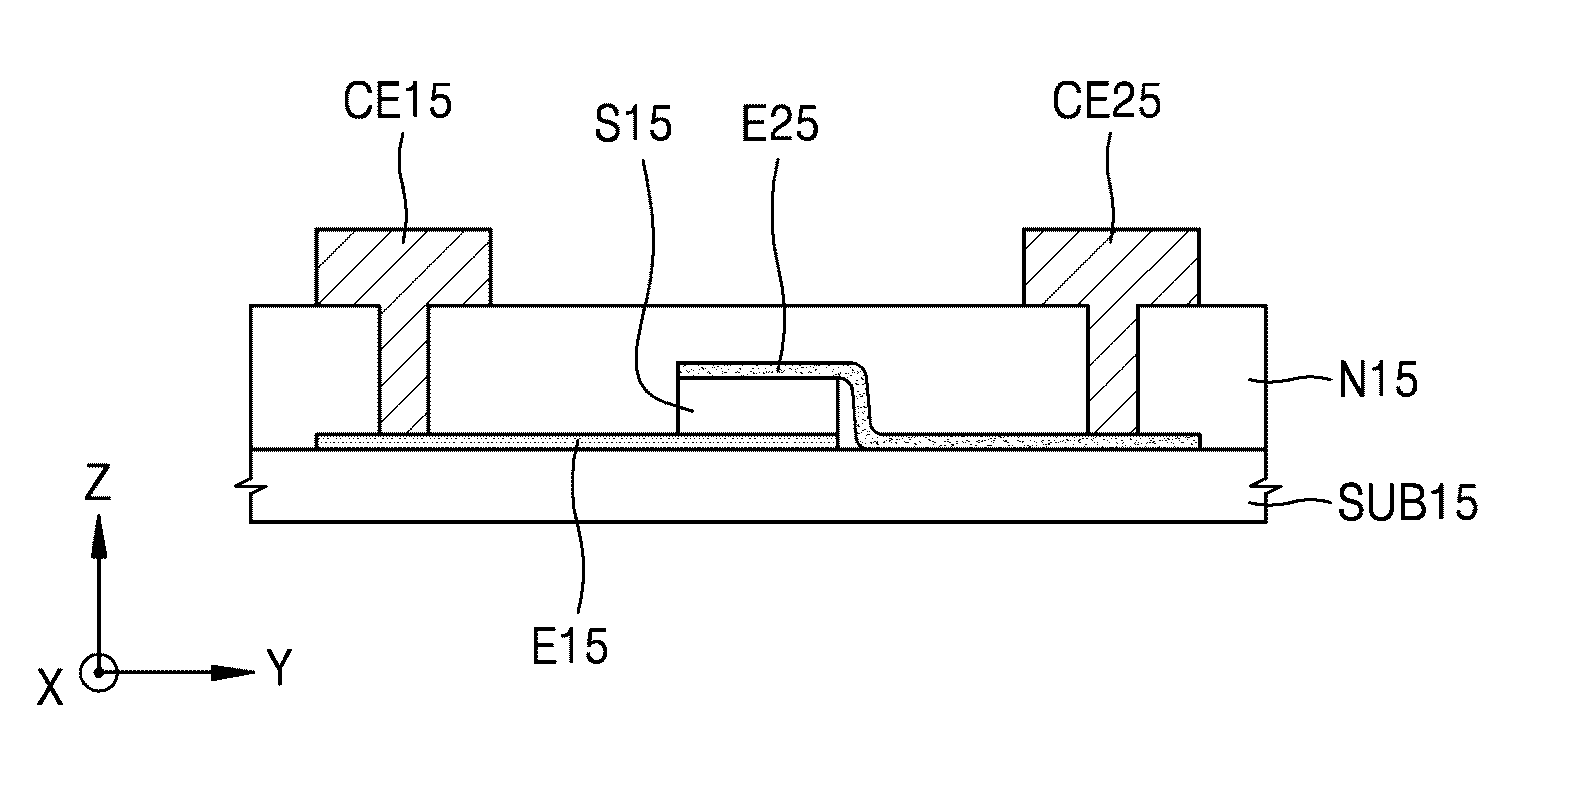 Semiconductor device including two-dimensional material, and method of manufacturing the semiconductor device